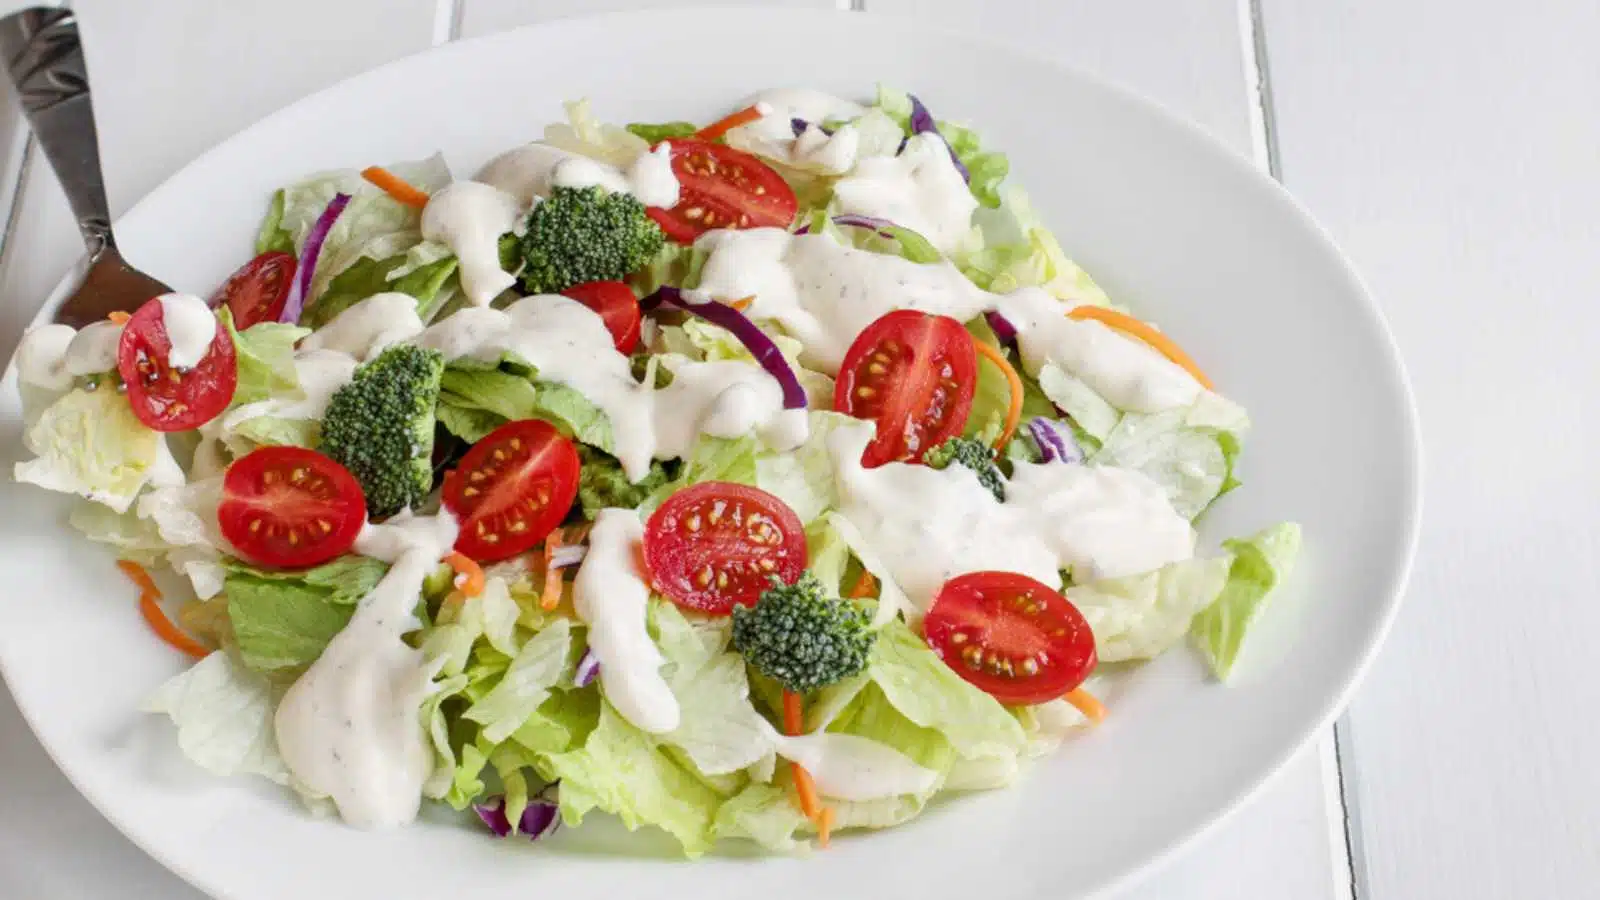 Vegetable salad with mayonnaise dressing